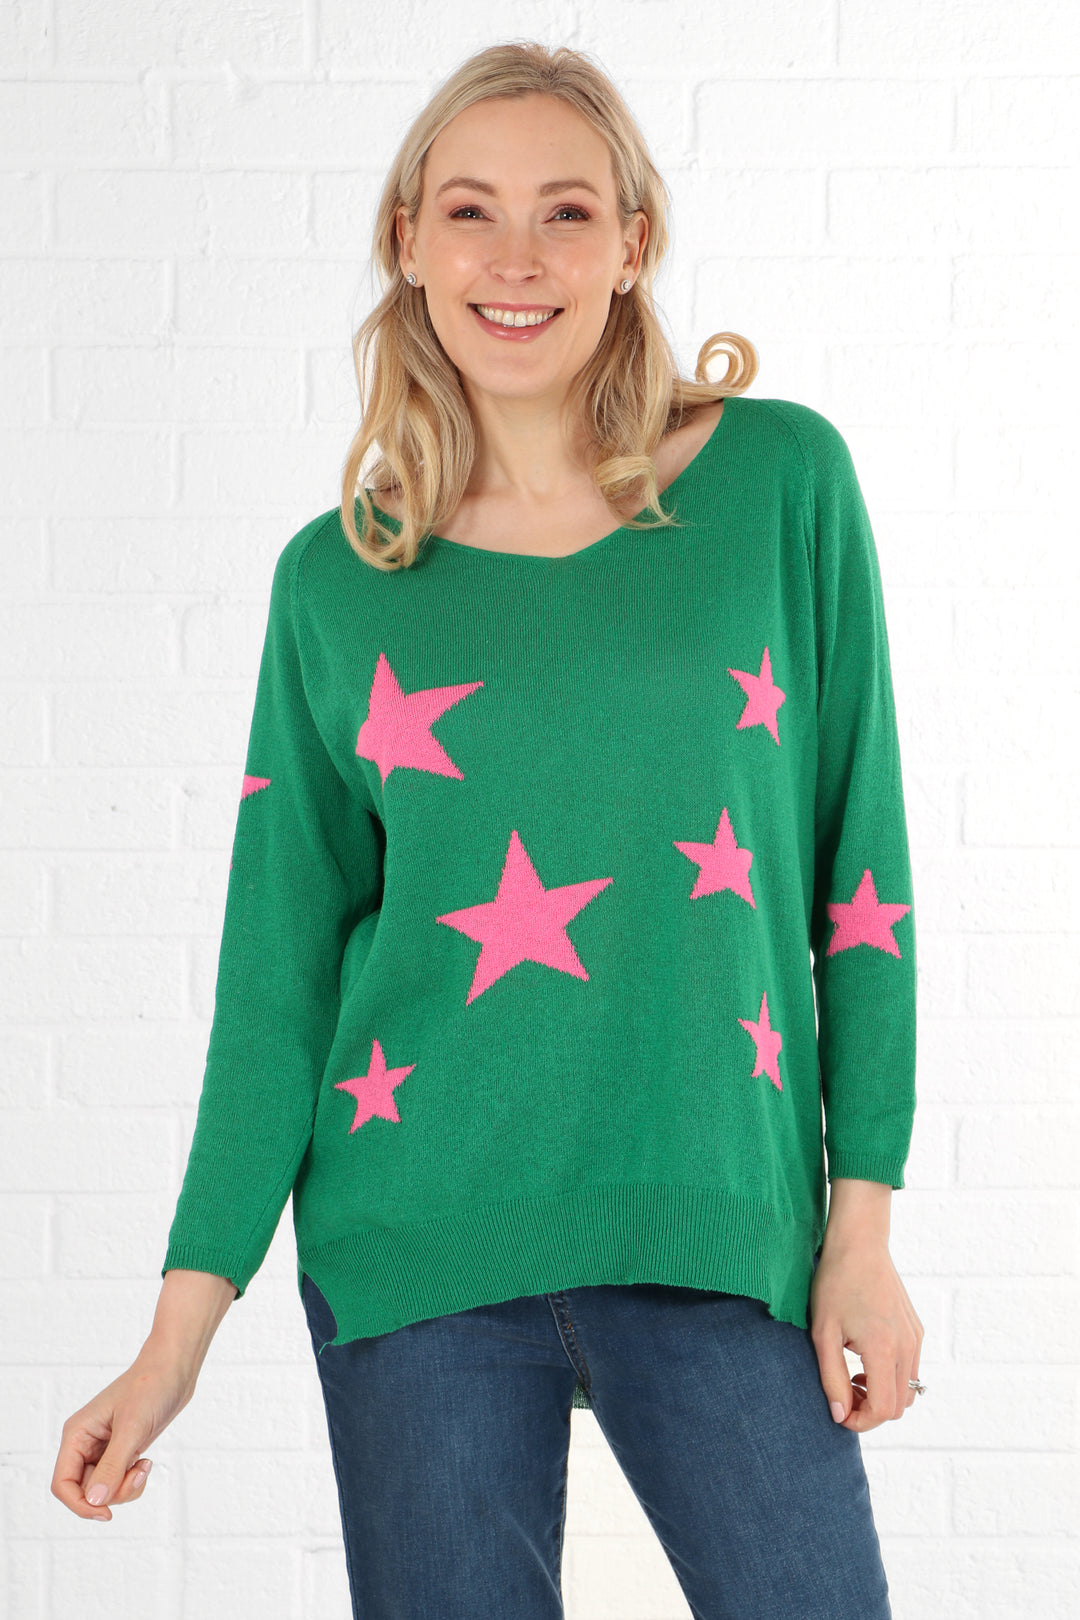 model wearing a green and pink star print long sleeve jumper made from natural cotton